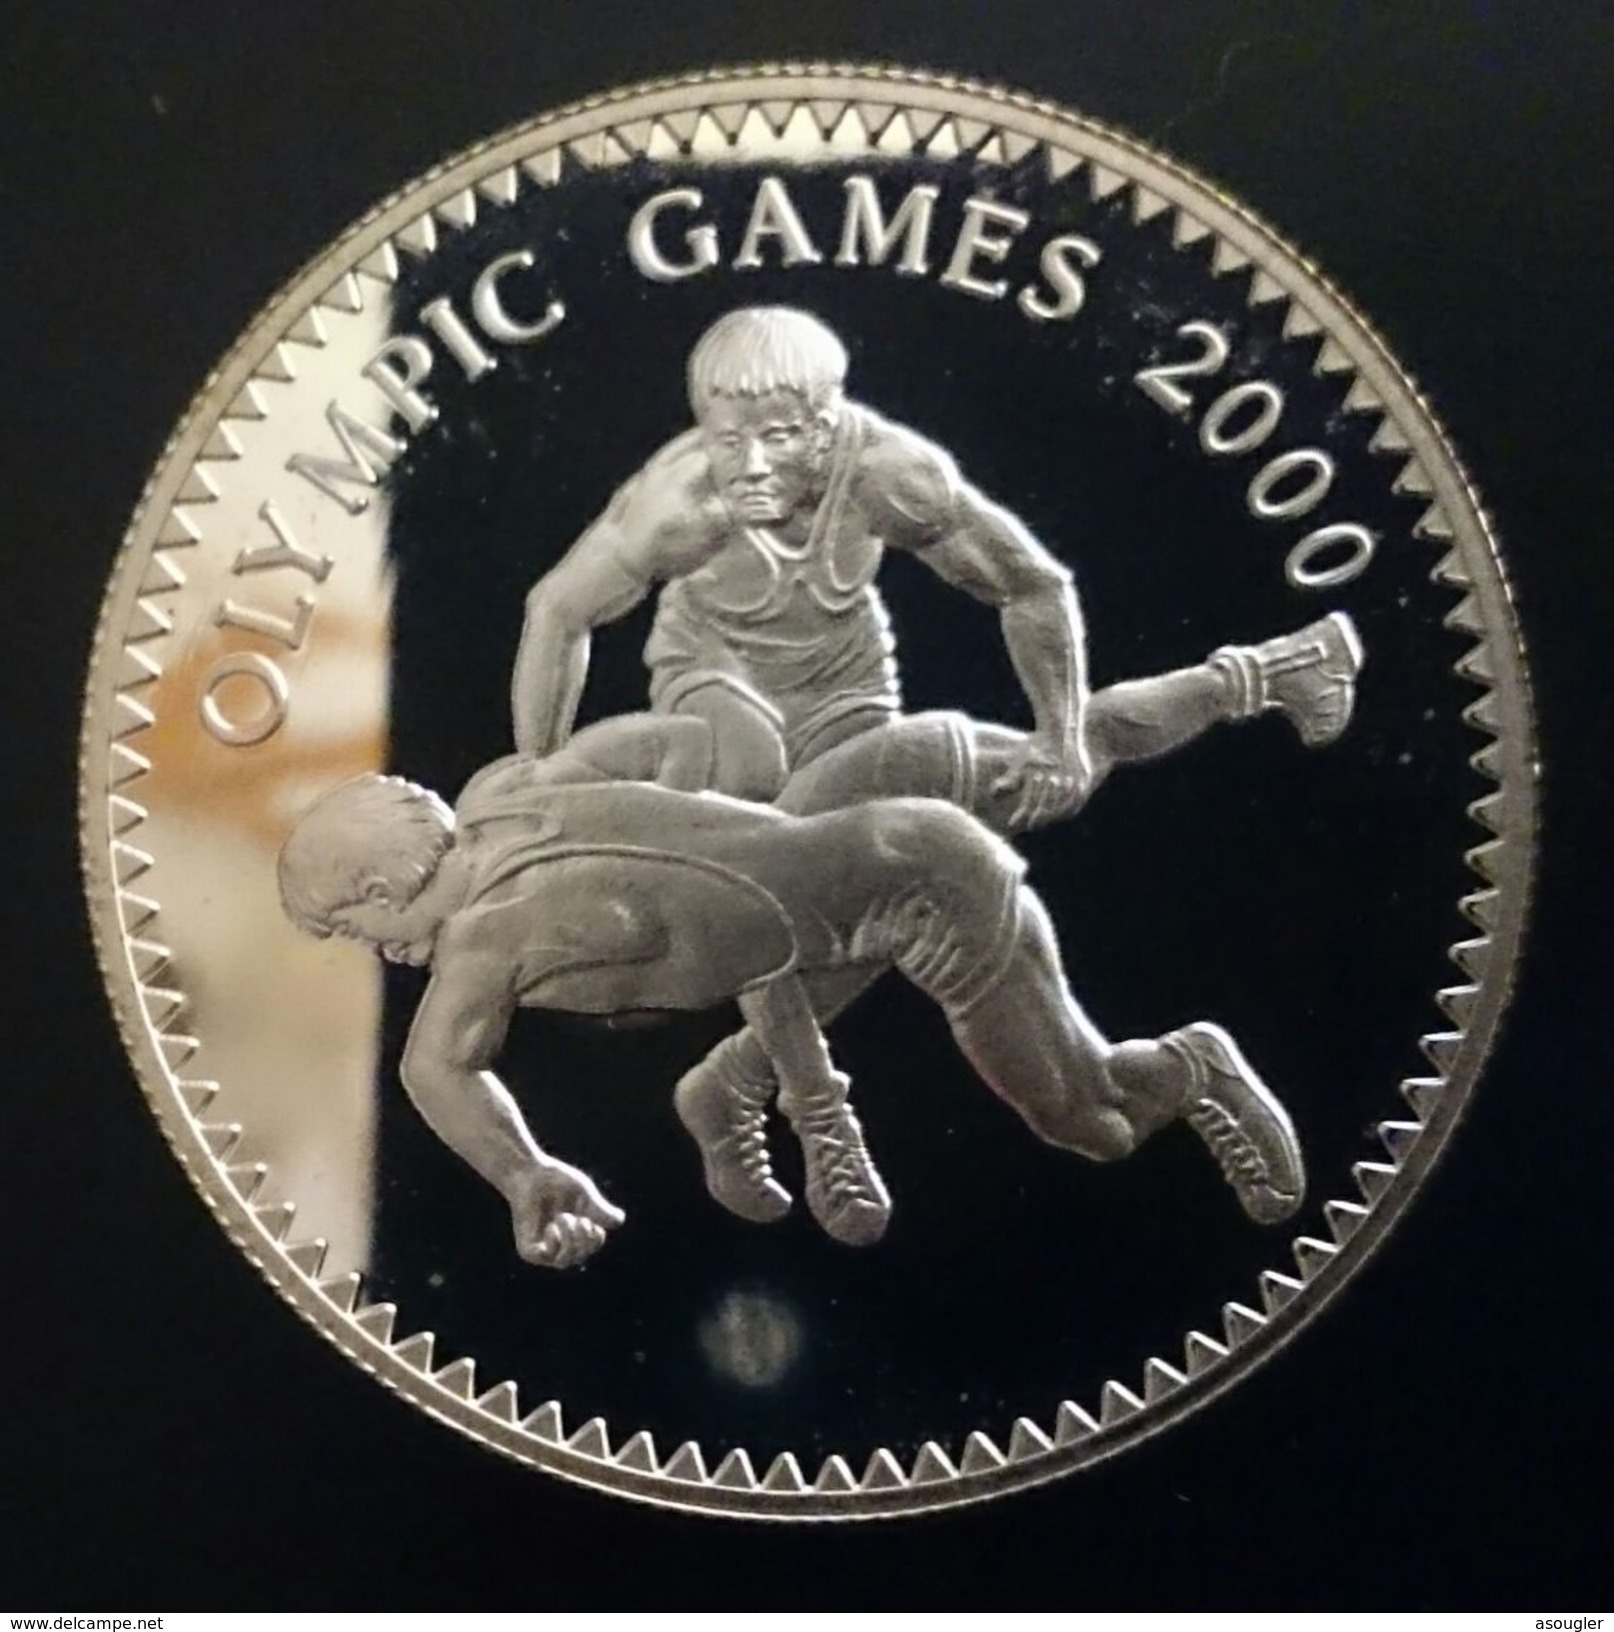 MONGOLIA 500 TUGRIK ND 1998 SILVER PROOF "2000 Olympics Games" Free Shipping Via Registered Air Mail - Mongolei